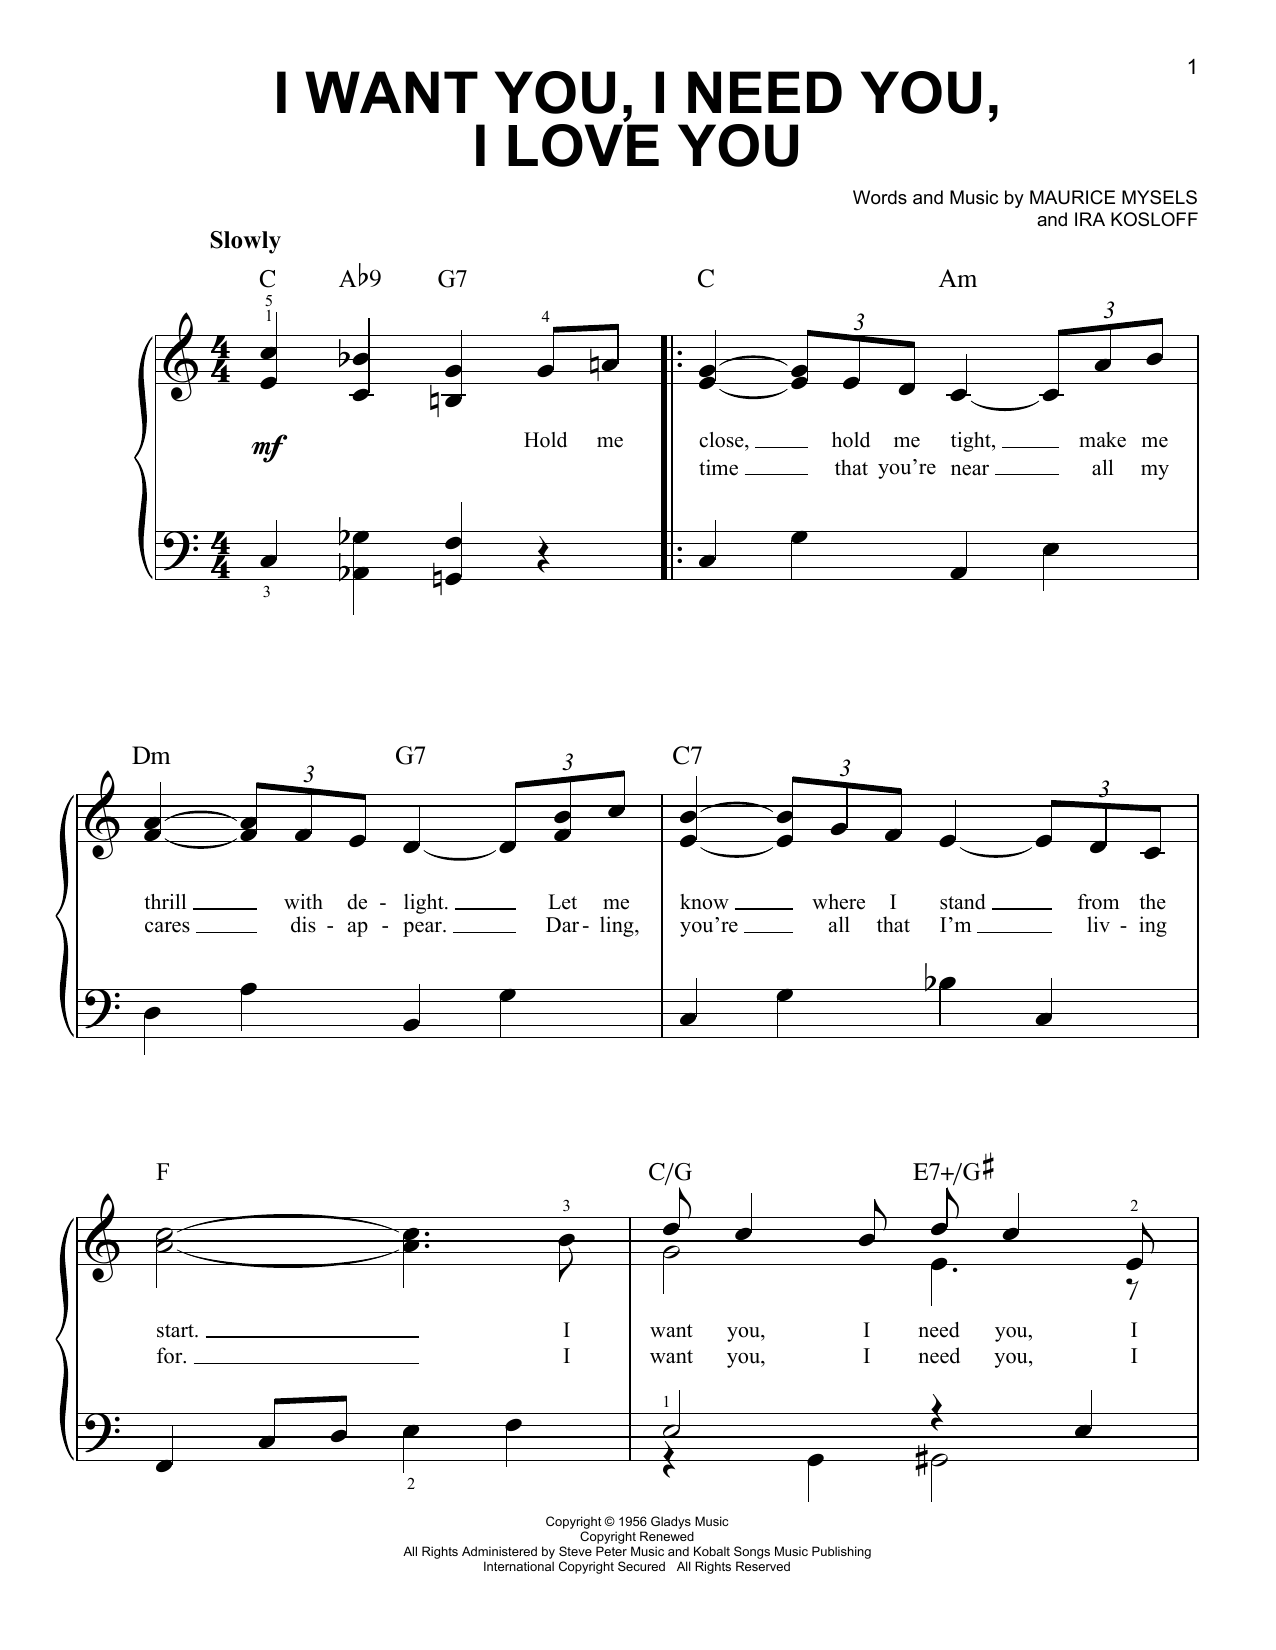 Download Elvis Presley I Want You, I Need You, I Love You Sheet Music